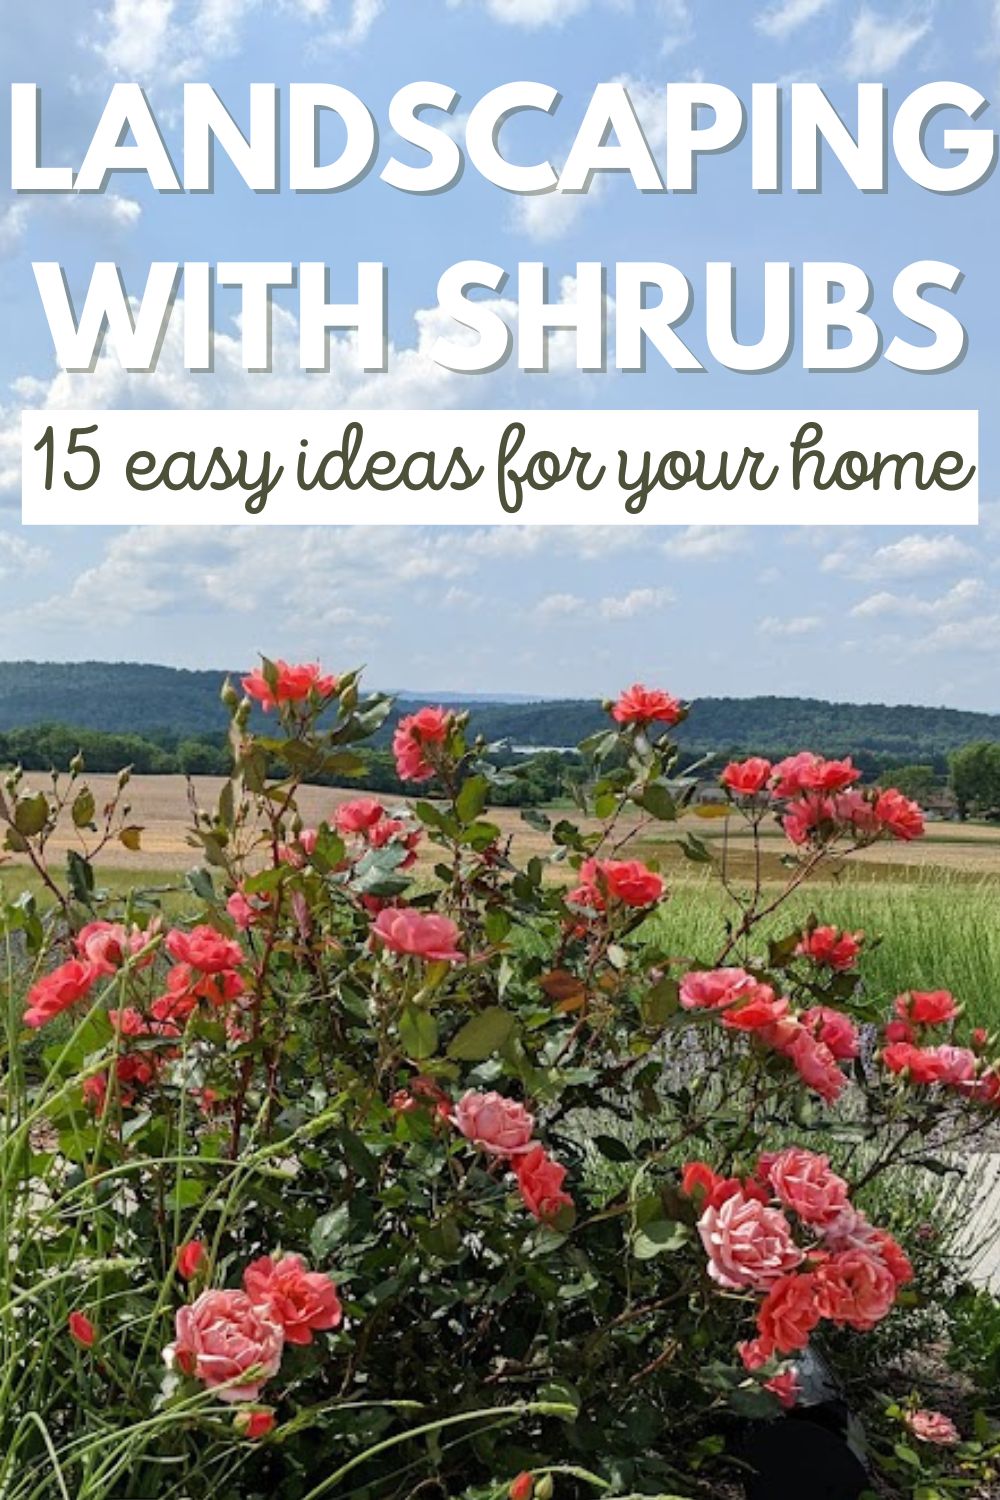 Landscaping with shrubs - 15 easy ideas for your home.